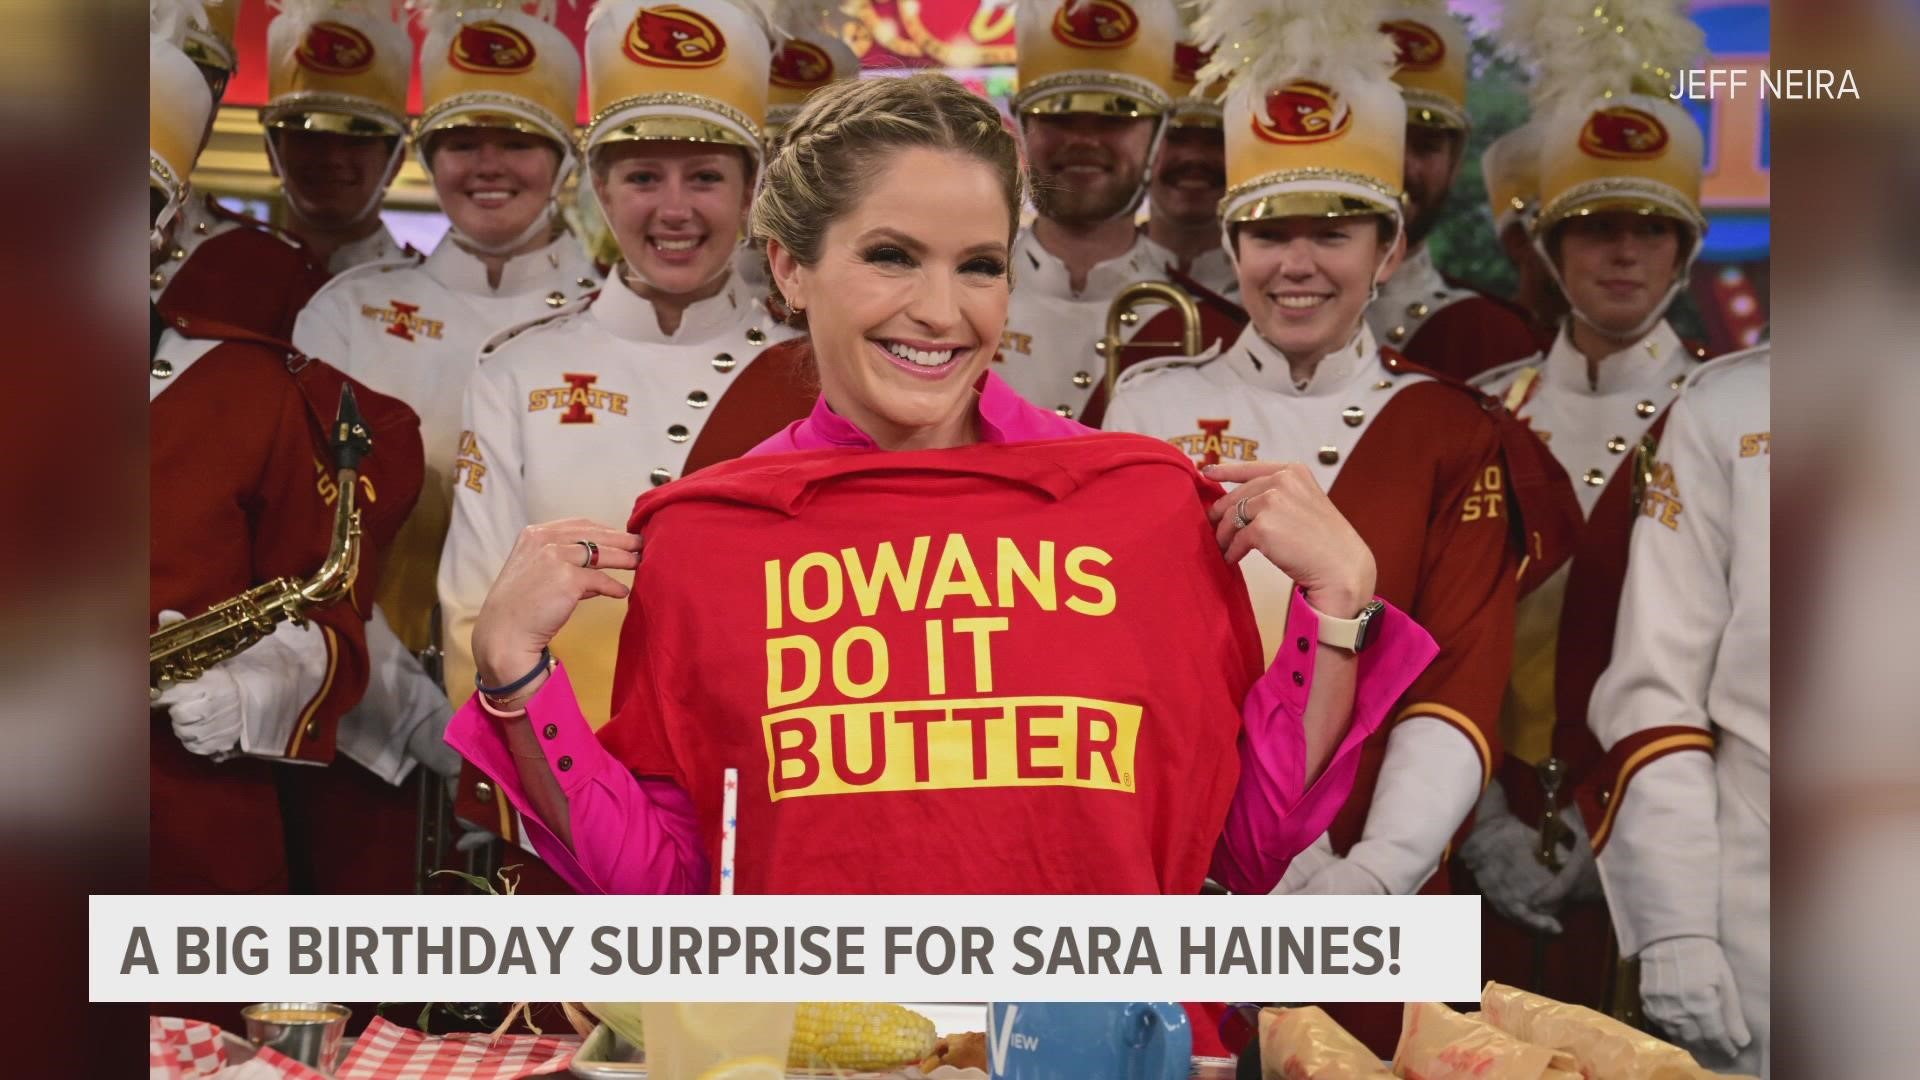 The celebration included a visit from the Iowa State University marching band and snacks from Iowa State Fair vendors.